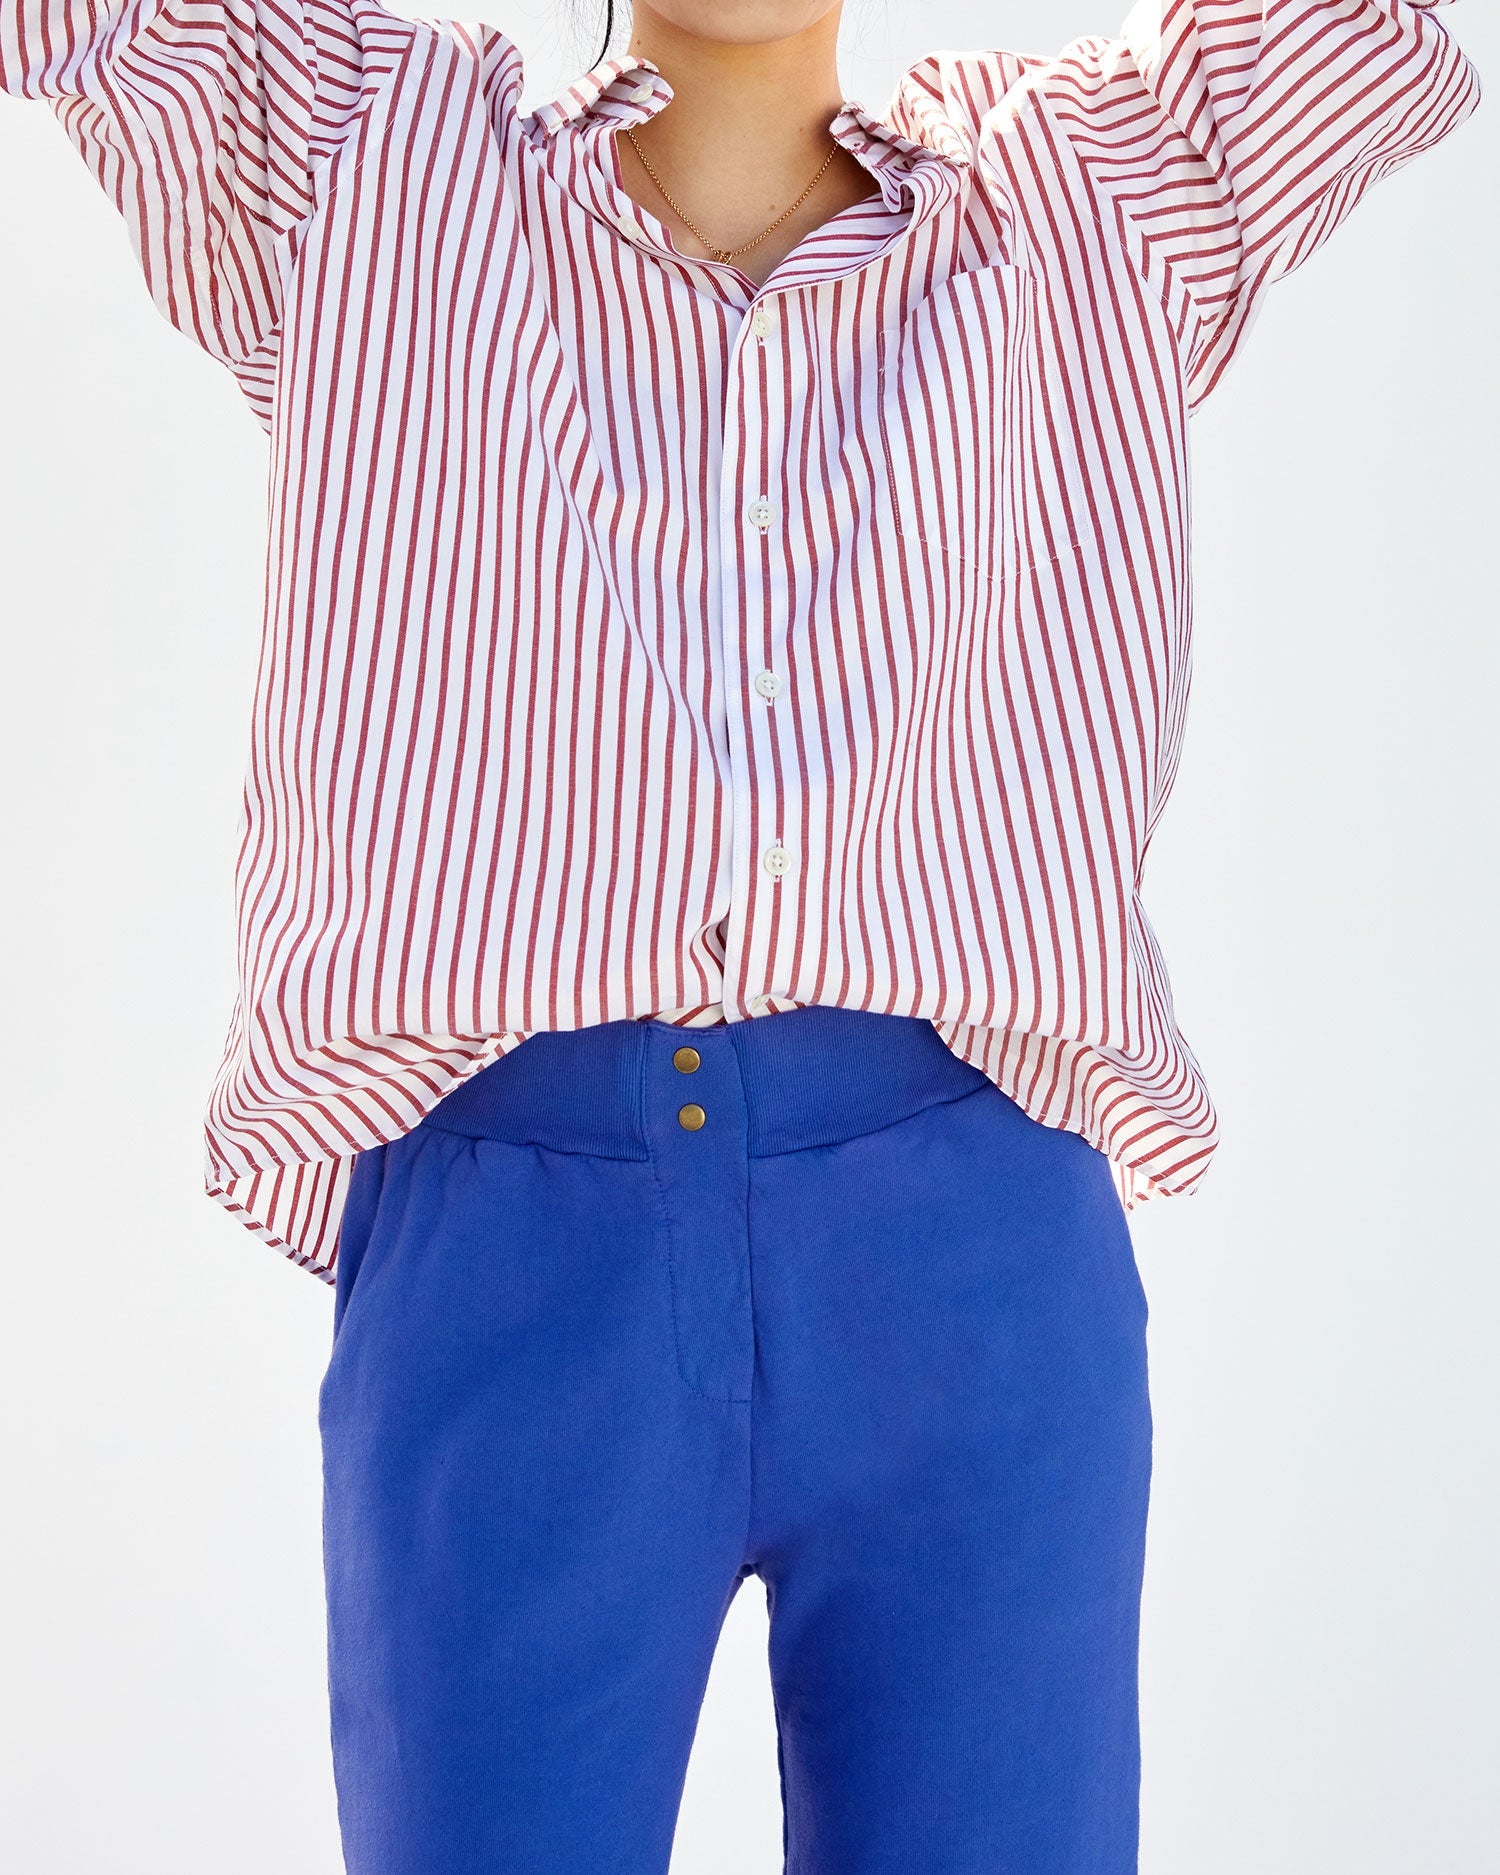 aurelia in the Cobalt Le Snap Pants with a striped button down front tucked in